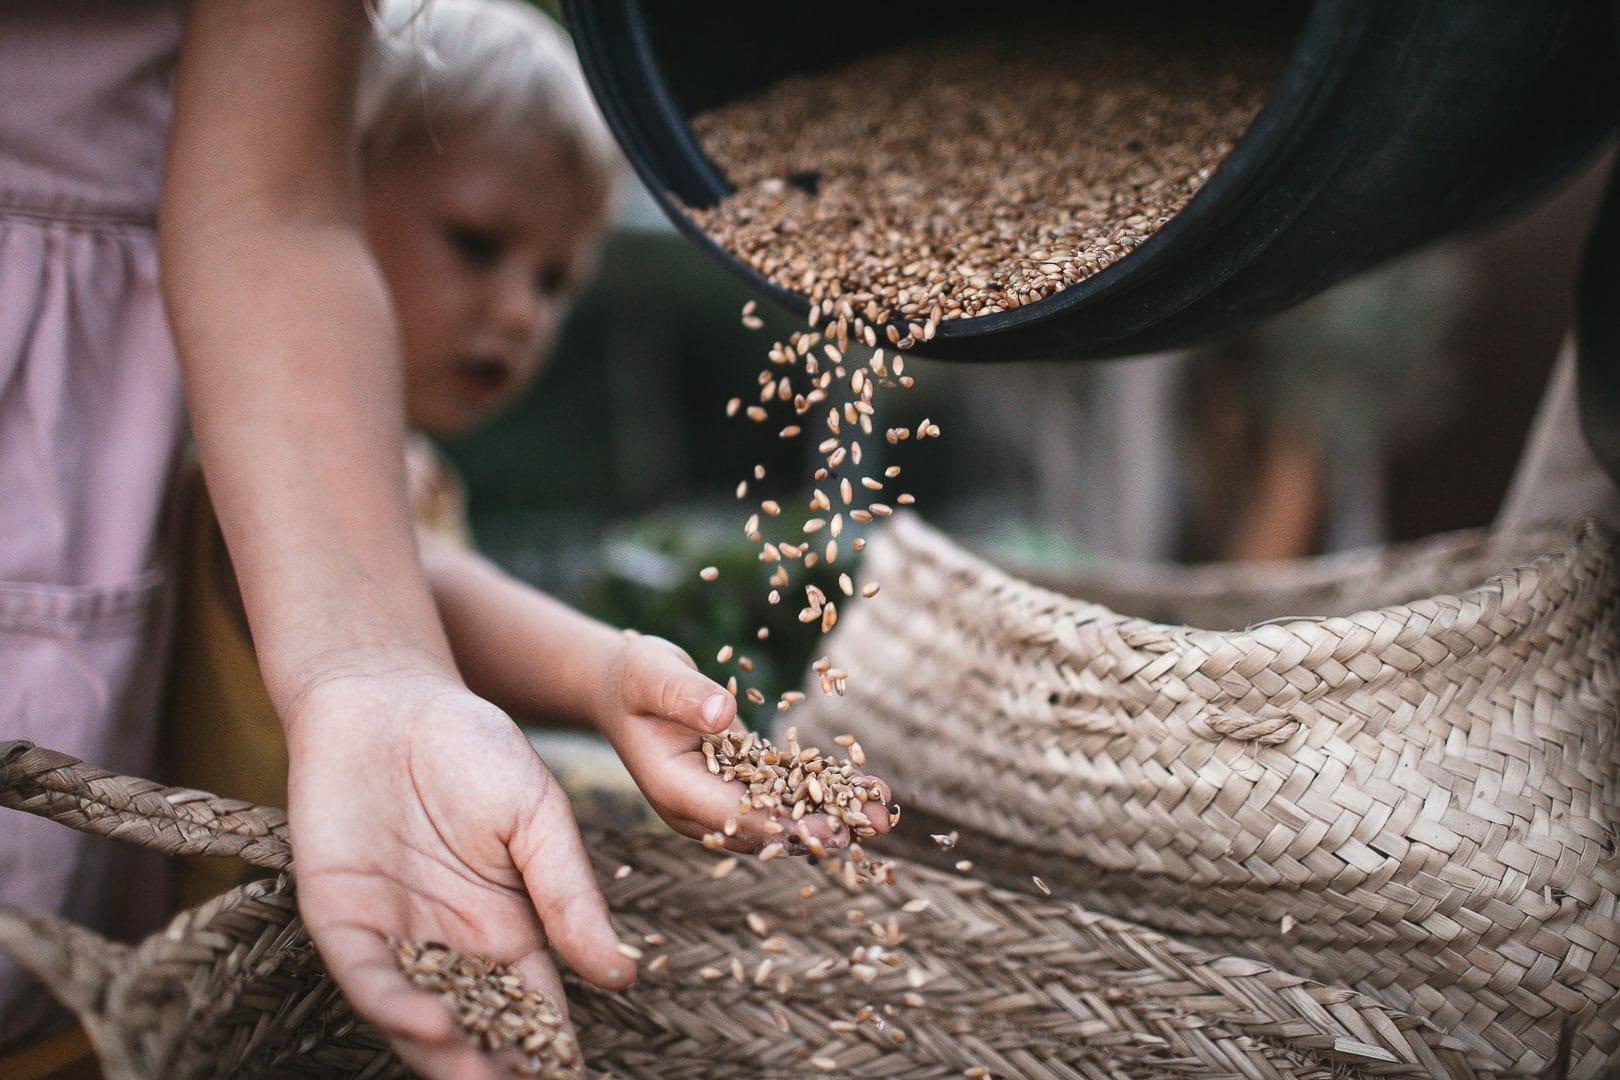 Photographic detail of two children playing with wheat seeds